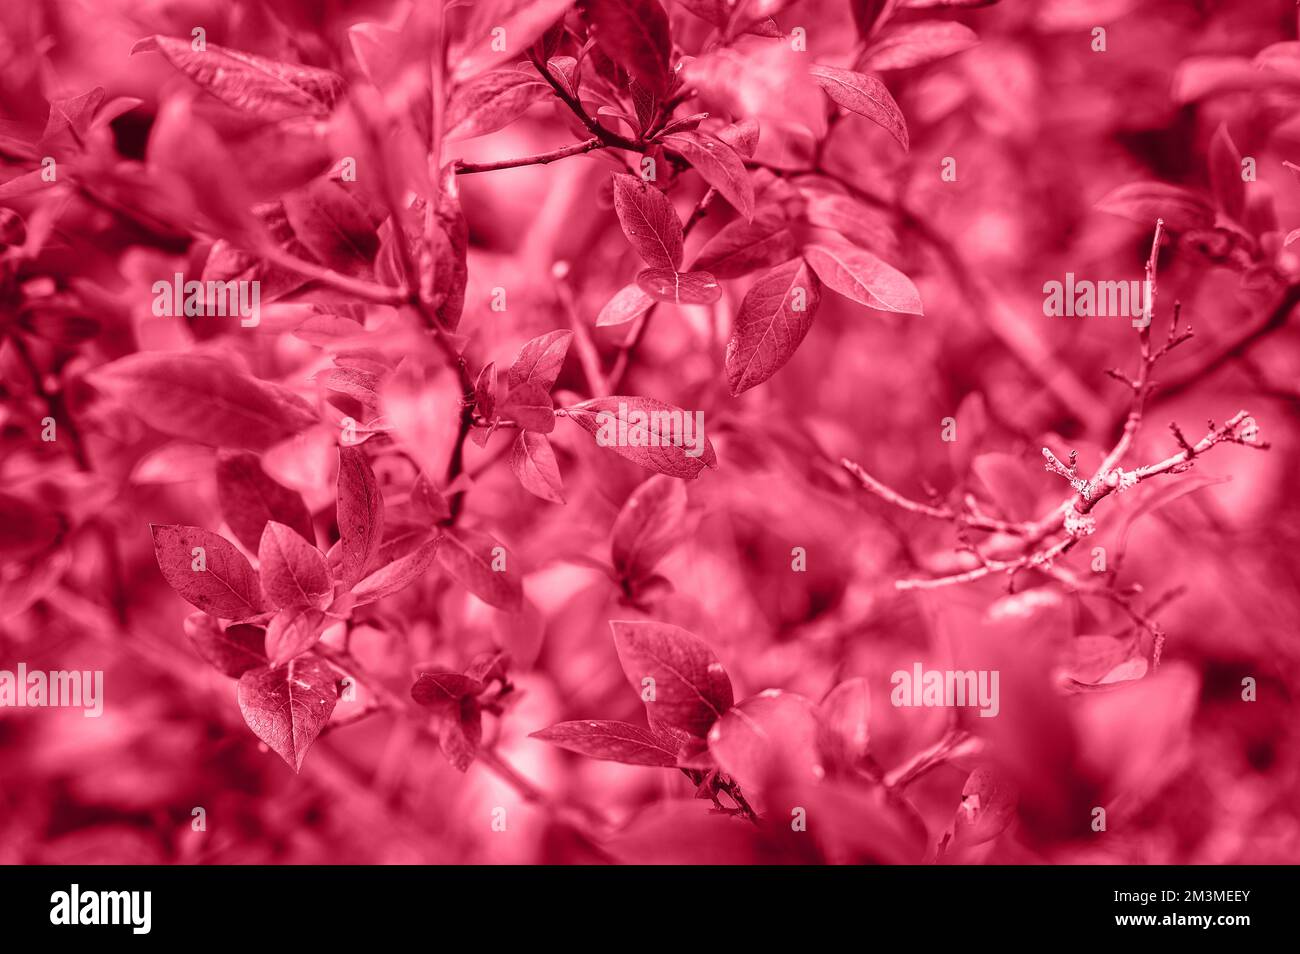 autumn bush with blueberry leaves. vaccinium corymbosum leaves burgundy red purple pink color in the garden in fall. gardening and nature concept. ton Stock Photo